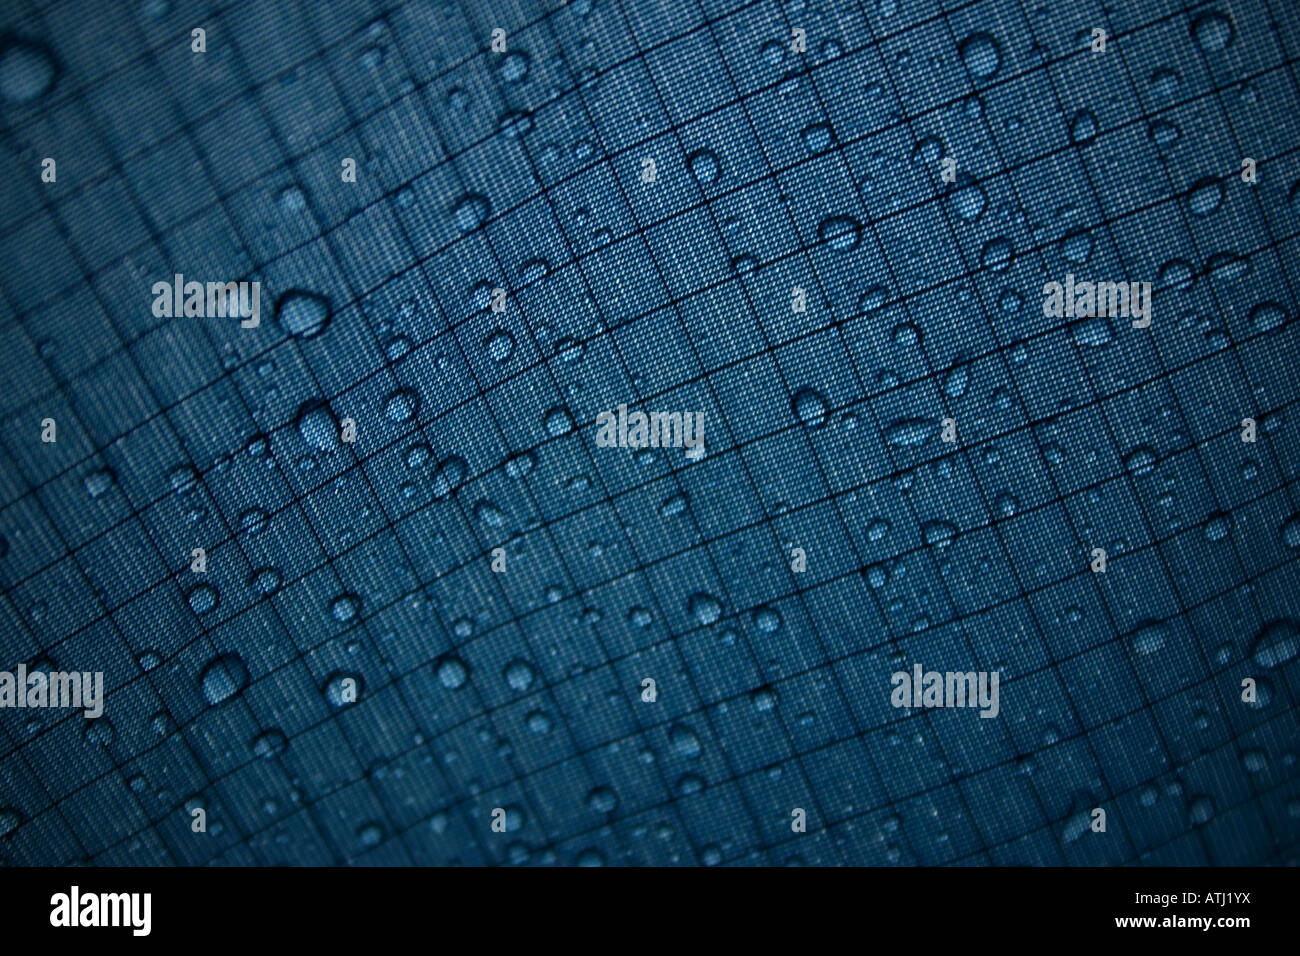 photo showing rain drops on the outside of tent canvas with stitching patterns Stock Photo